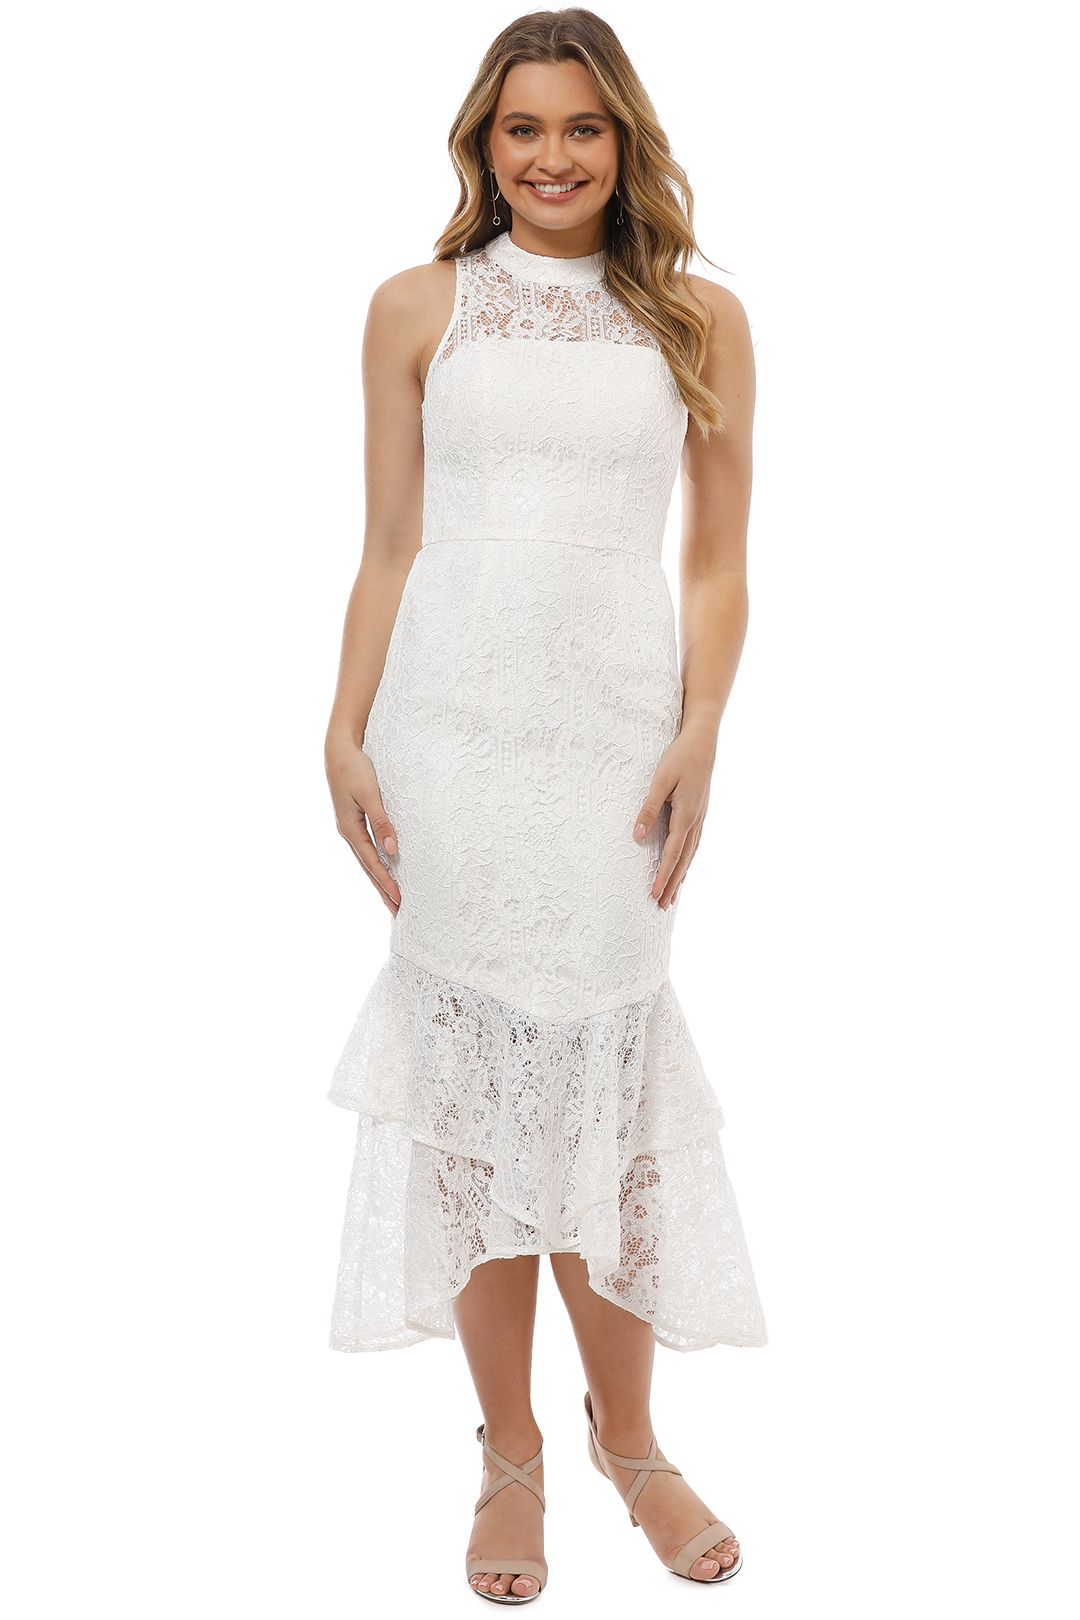 George - Carla Dress - White - Front 